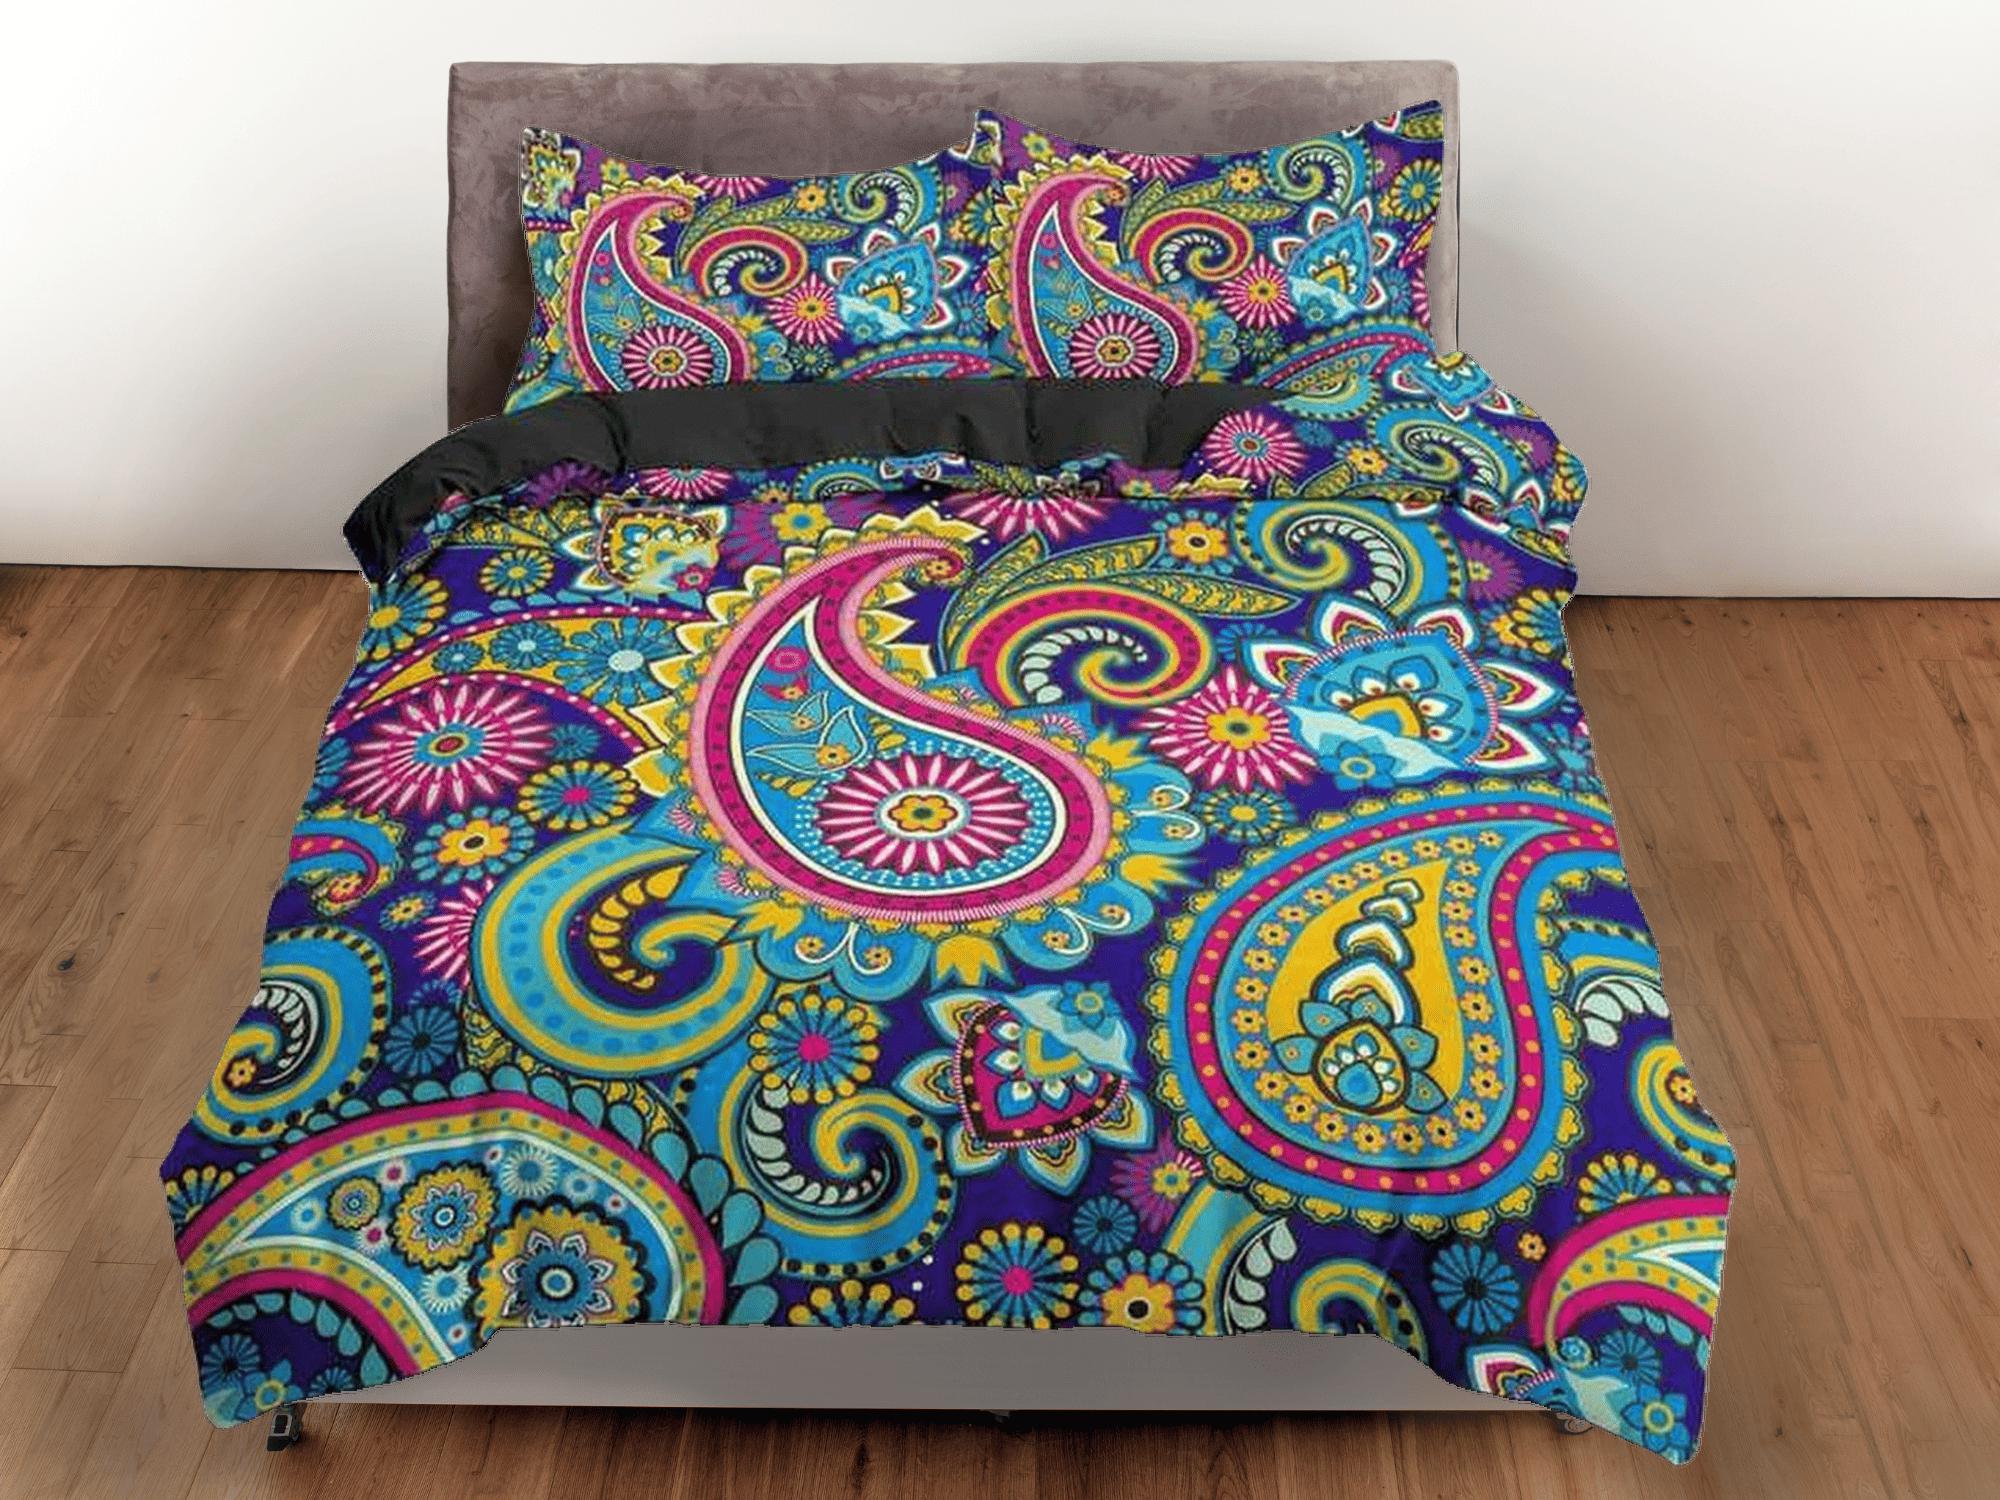 daintyduvet Colorful paisley pink blue duvet cover set, aesthetic room decor bedding set full, king, queen size, abstract boho bedspread, luxury bedding